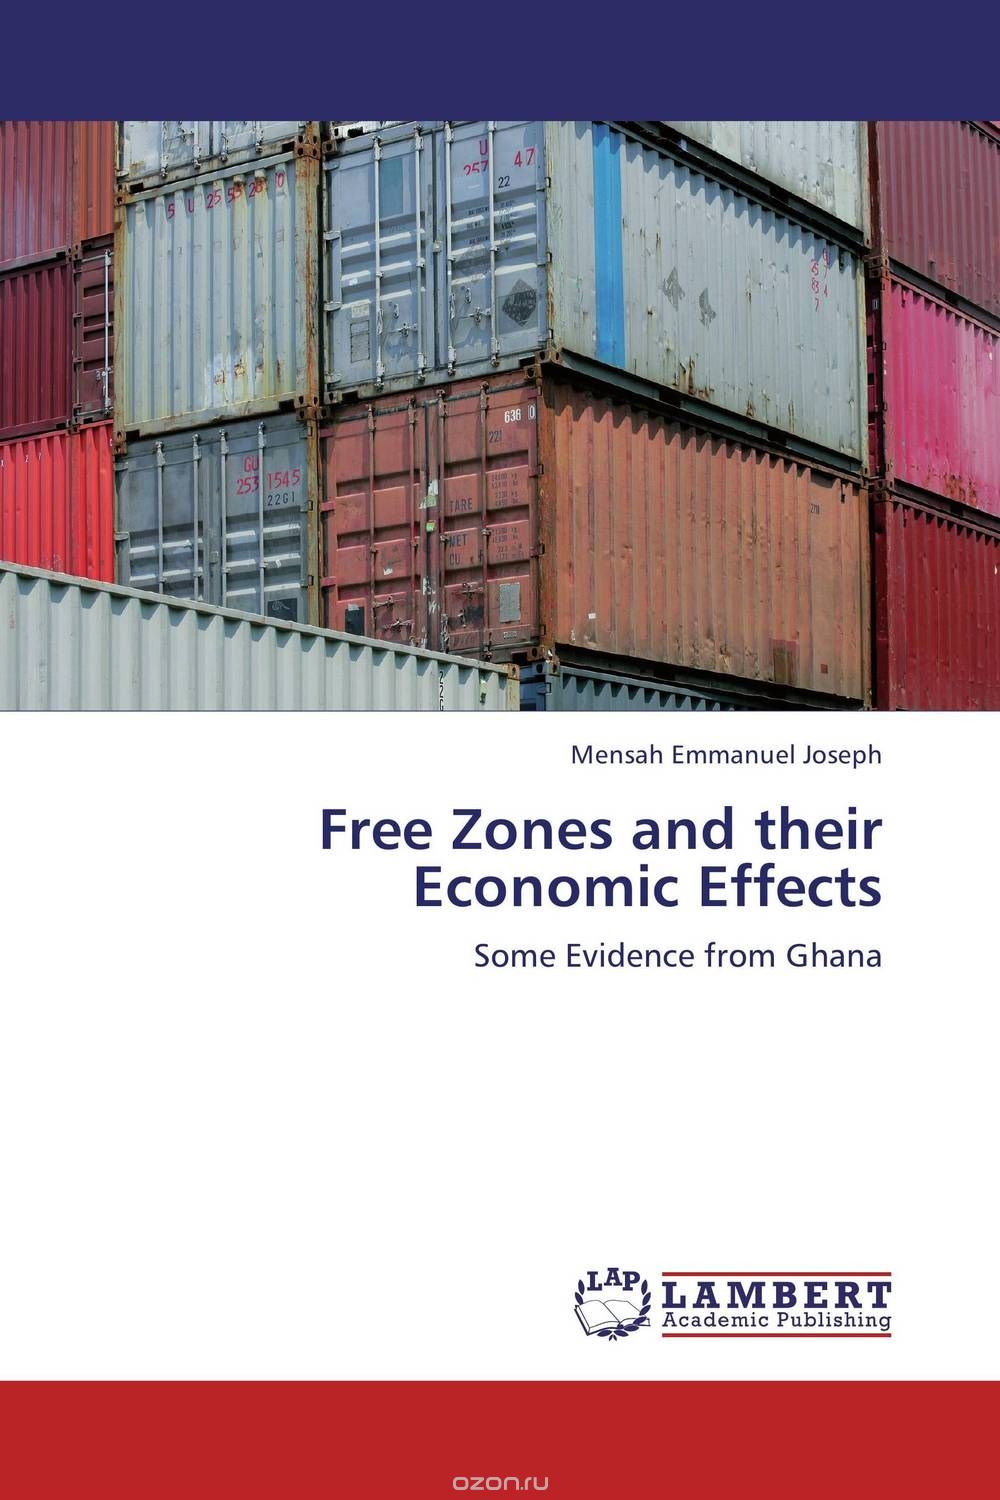 Free Zones and their Economic Effects